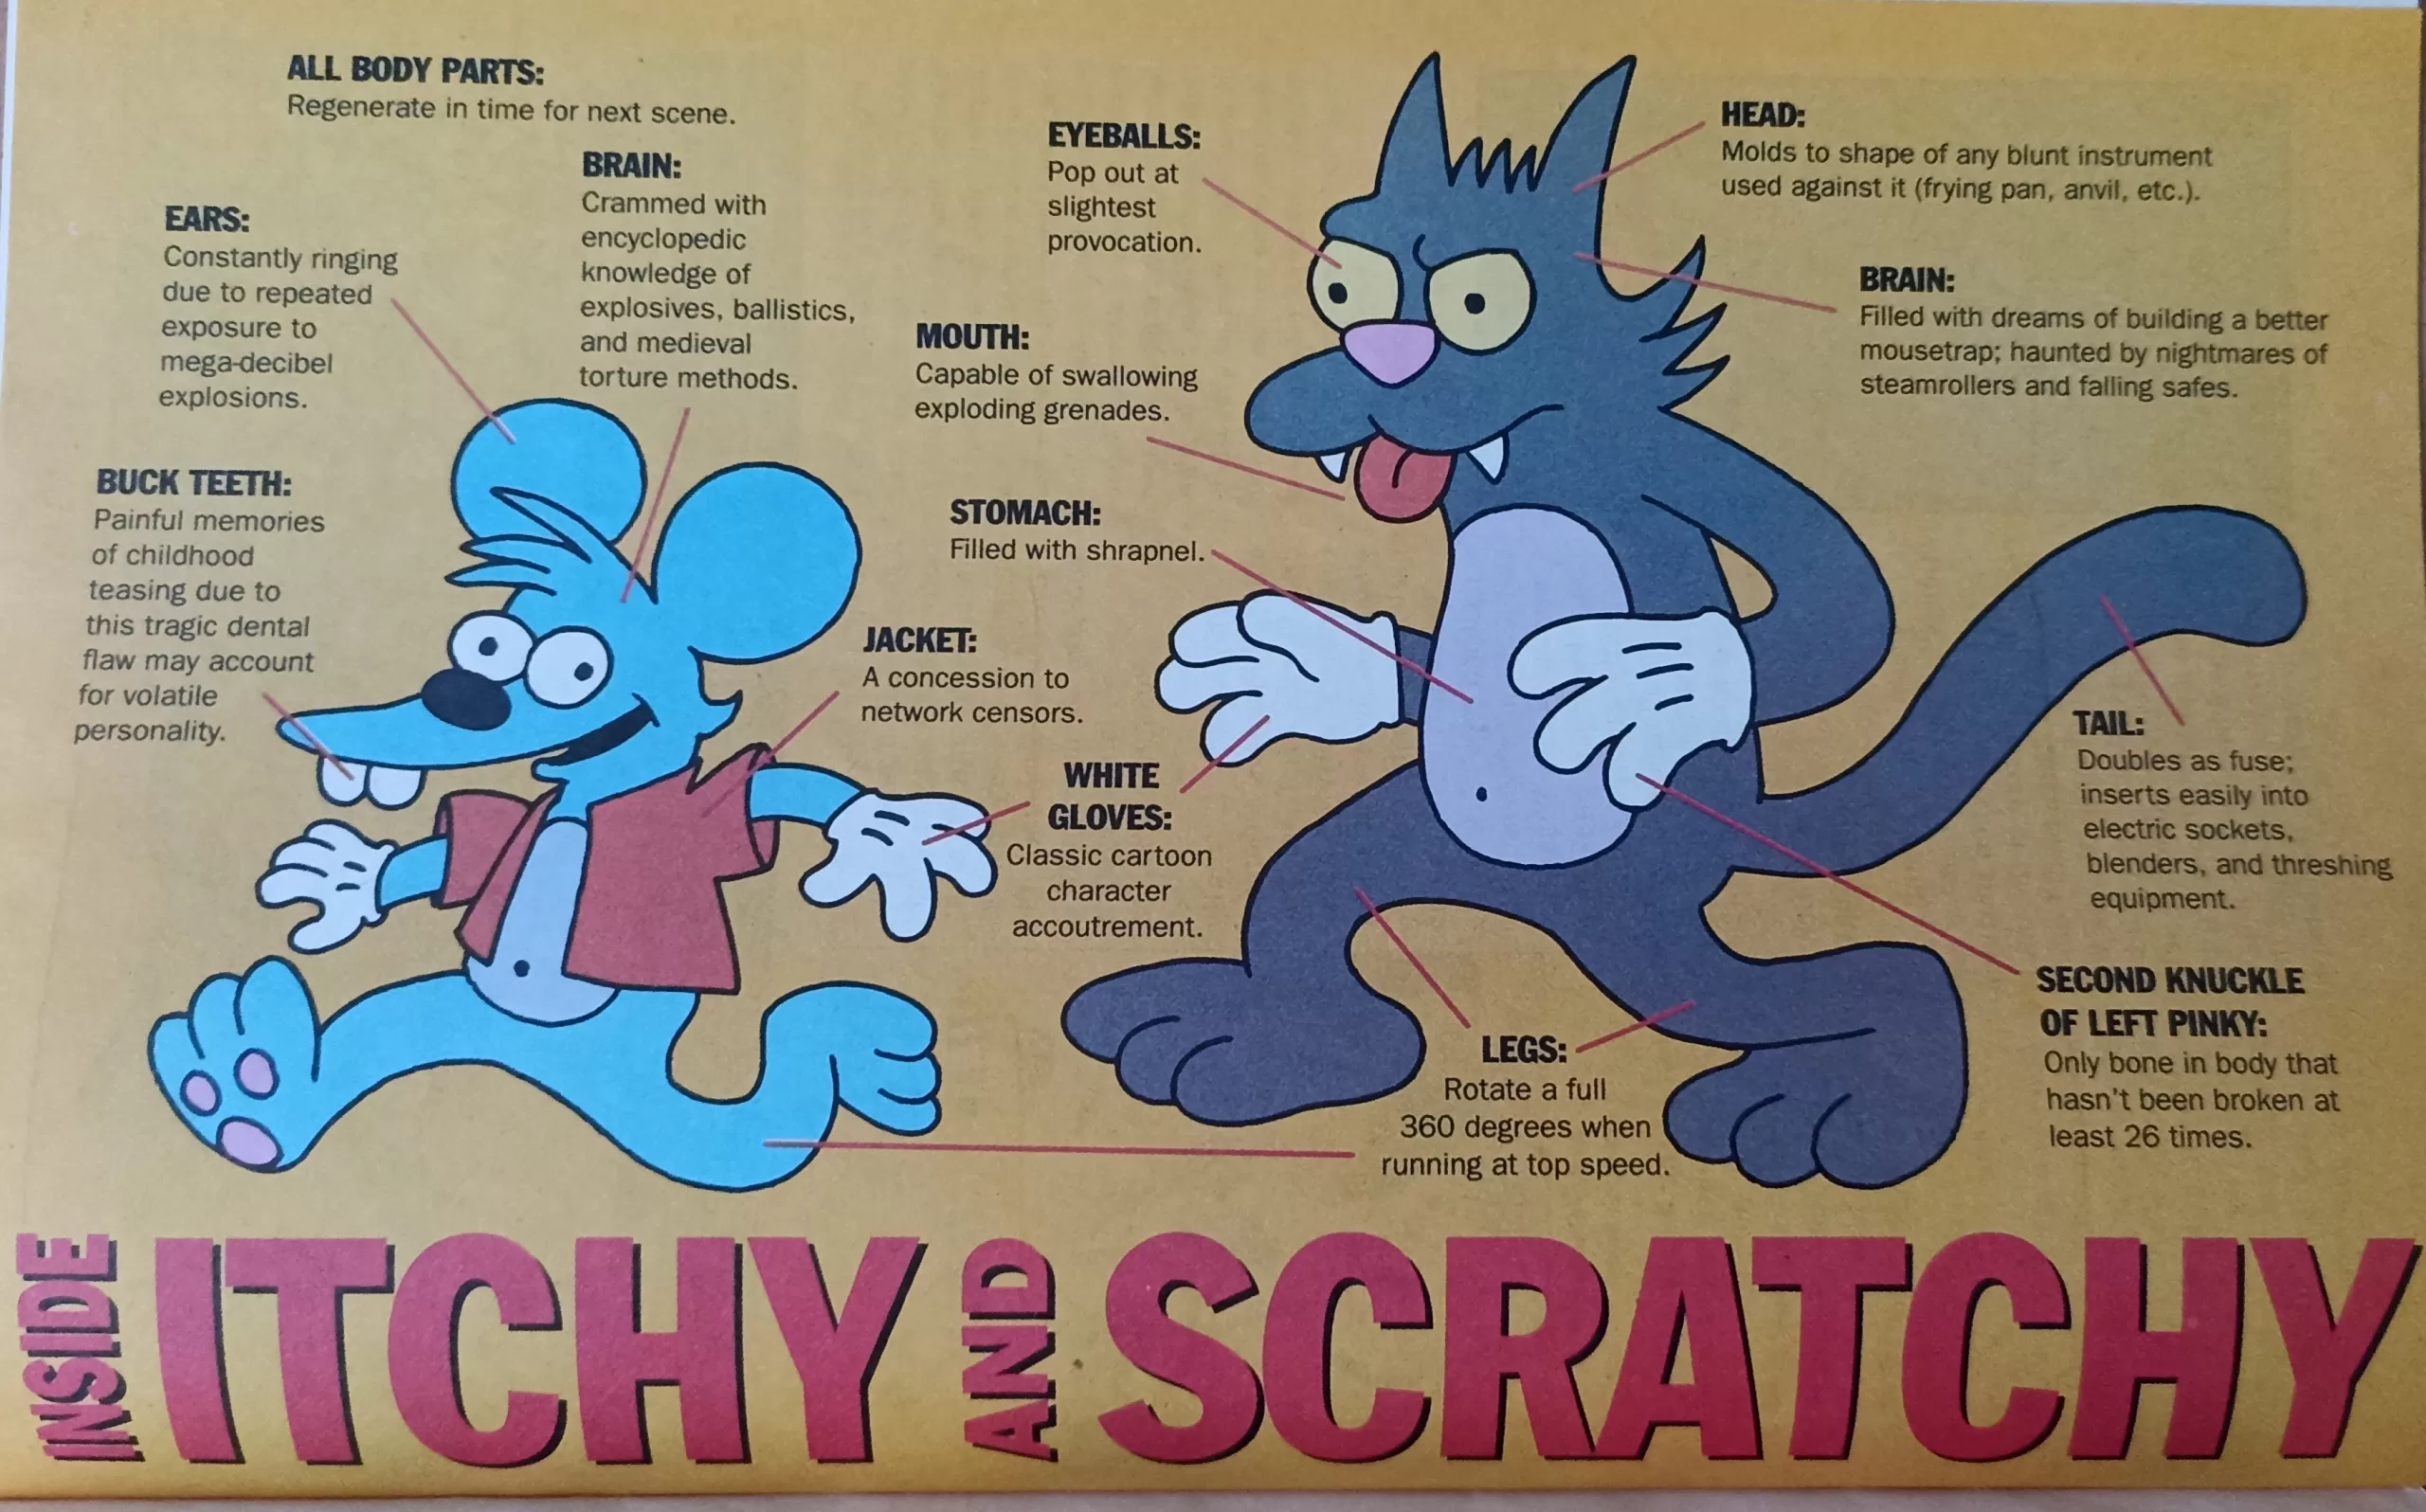 Itchy & Scratchy body part diagram